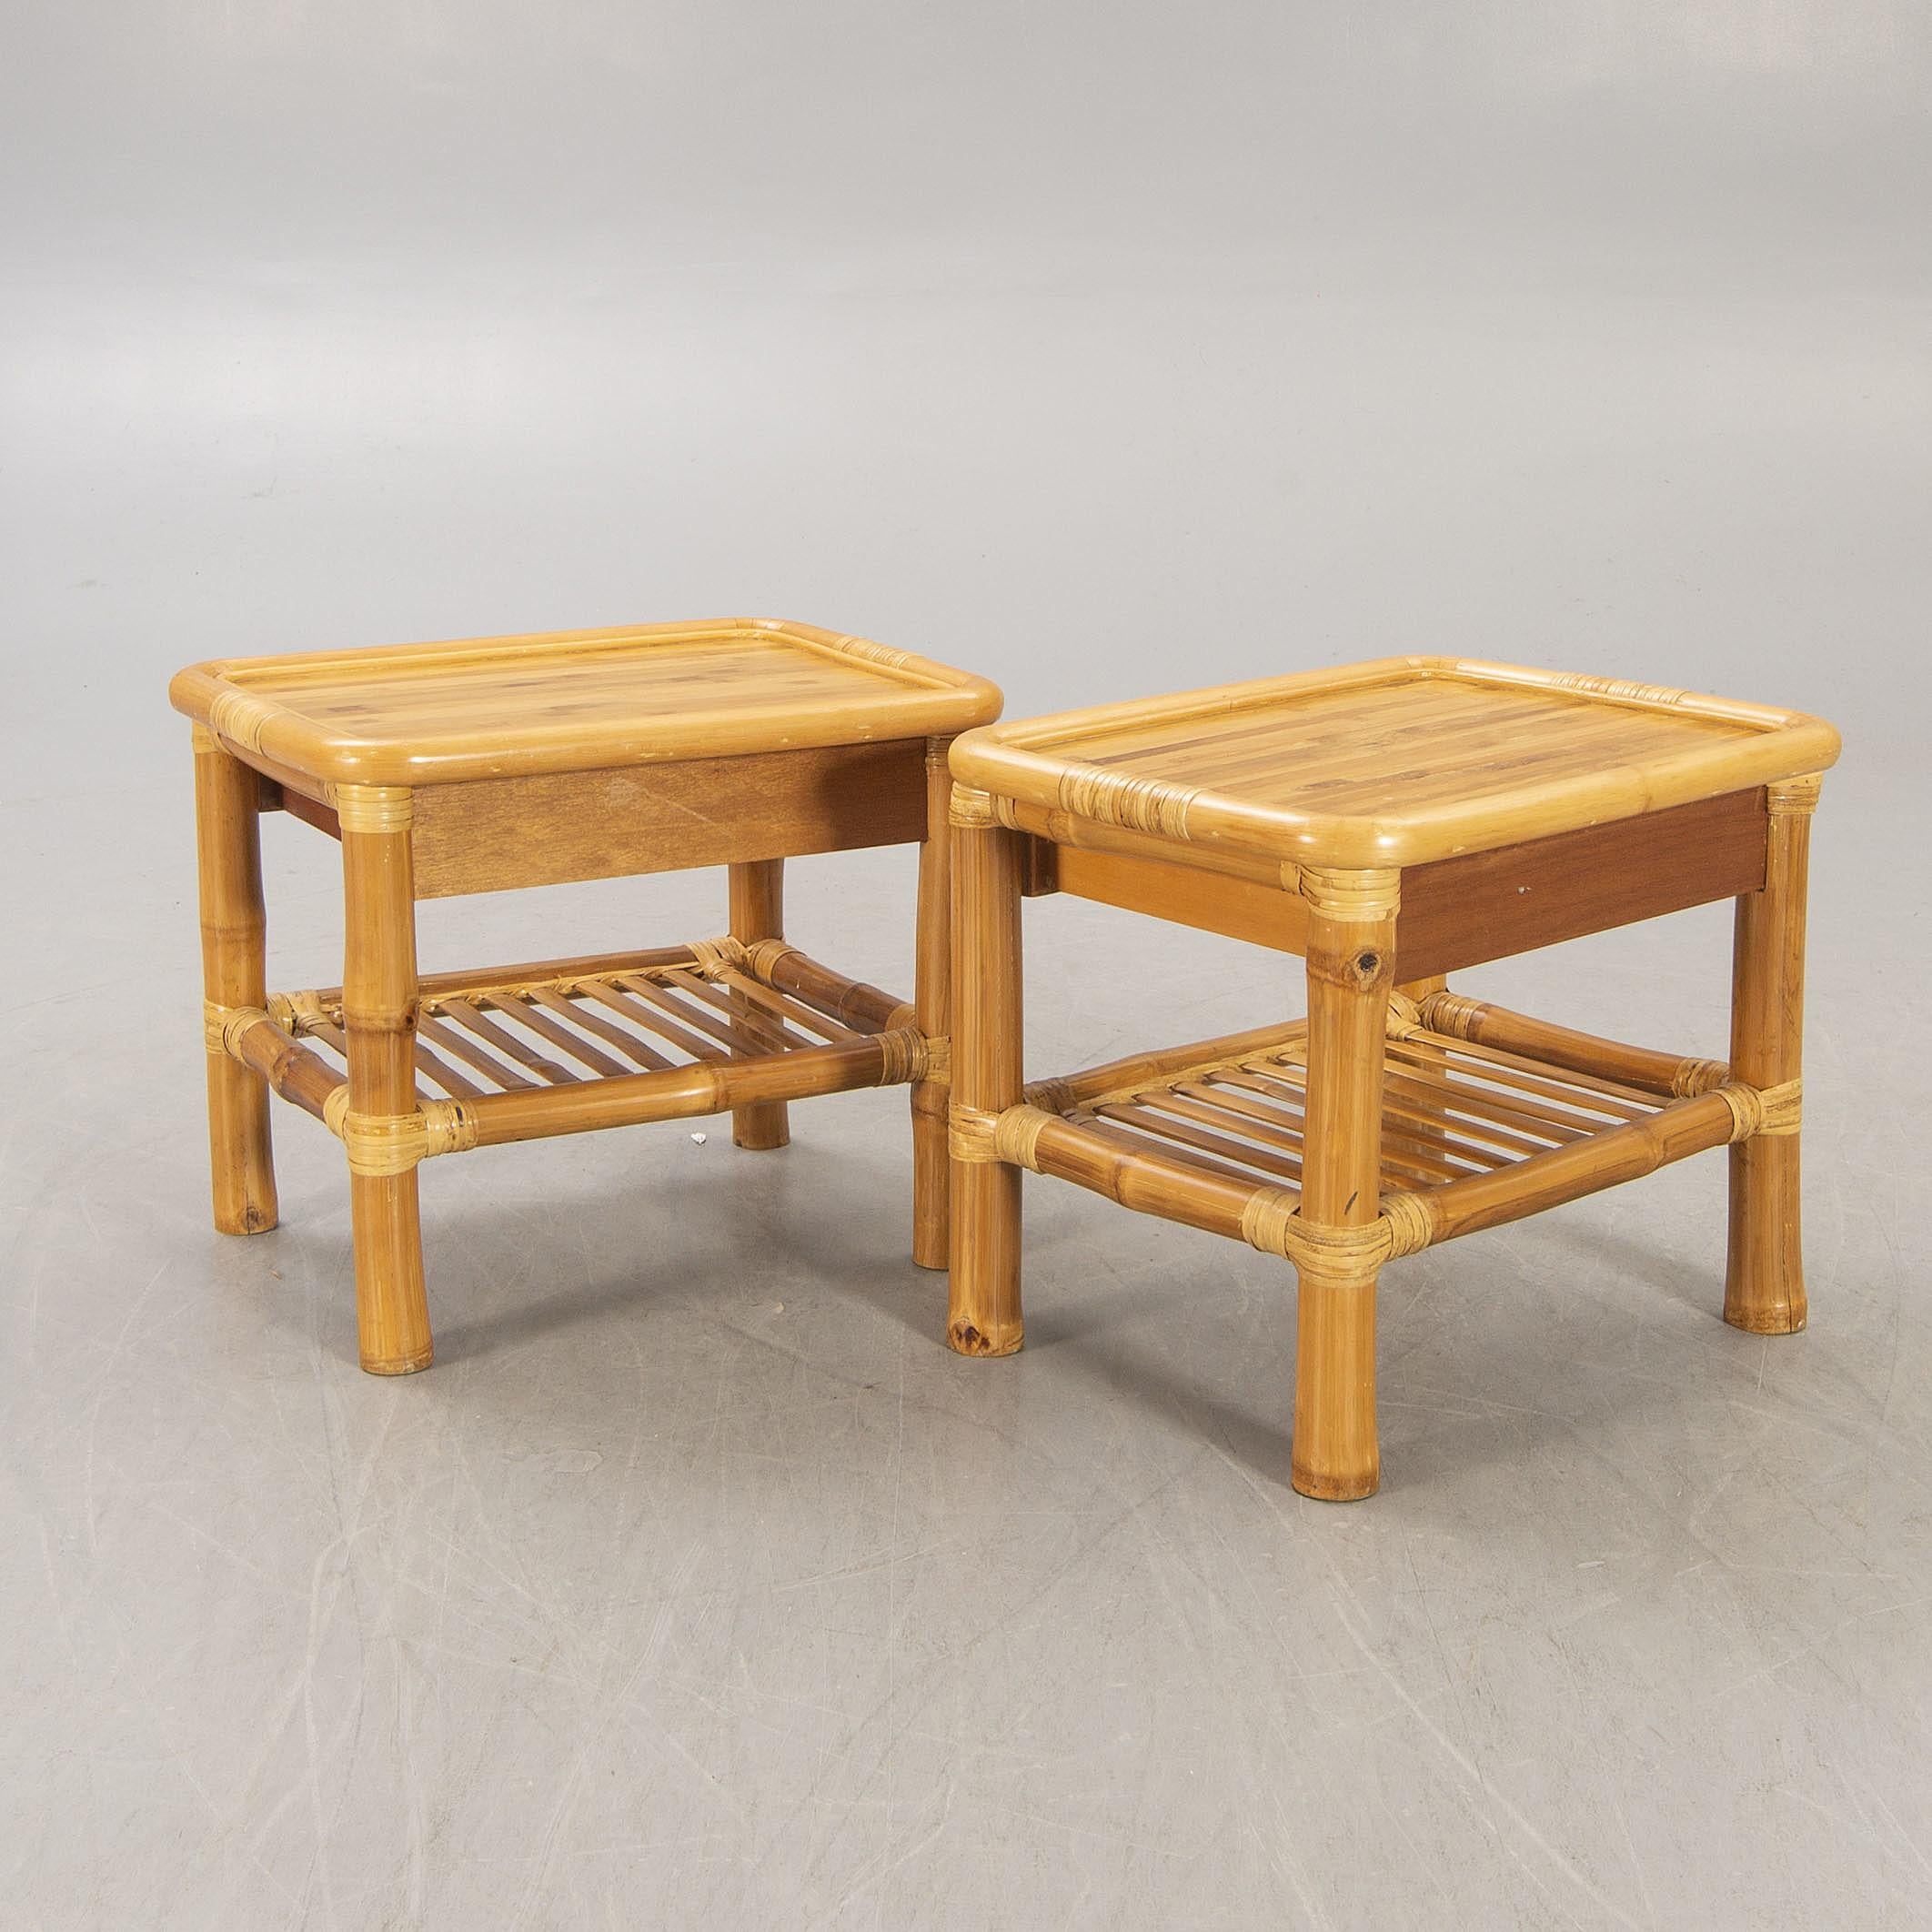 Bamboo and wood tables a pair probably by DUX, Sweden, 1960
Very good condition, solid cabinetmaking in the style and quality of DUX of Sweden.
Original from Sweden.